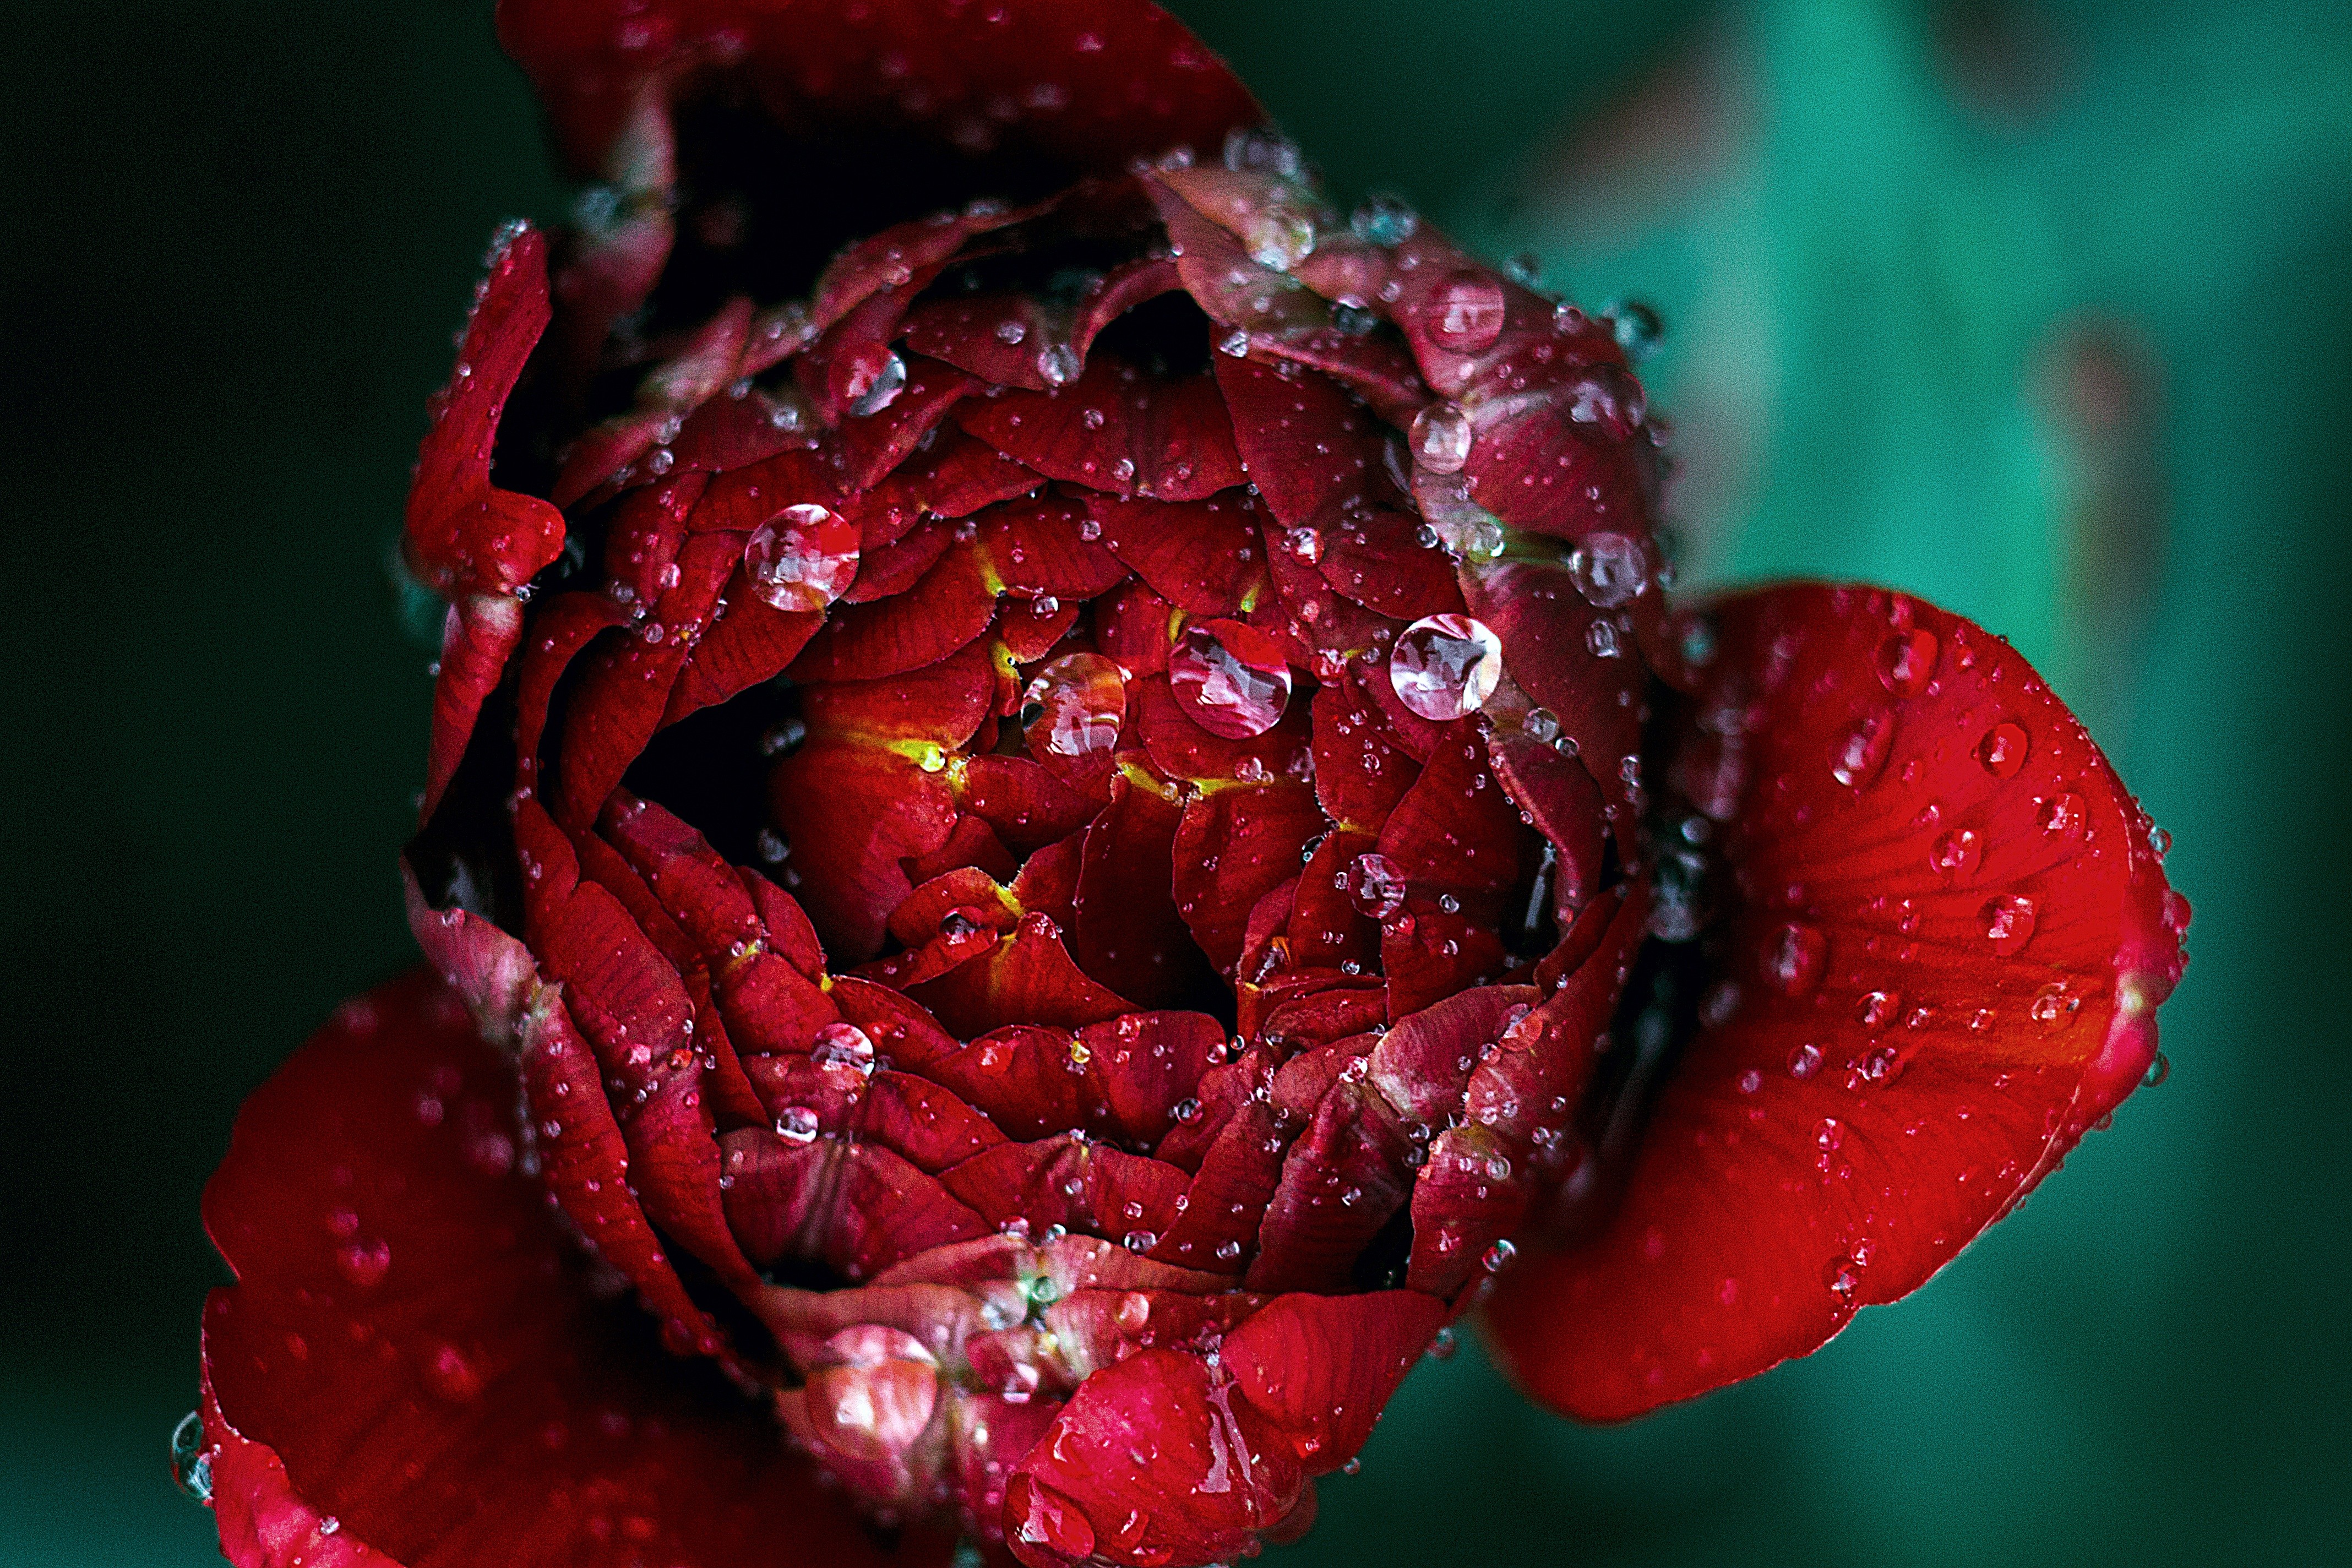 General 4272x2848 nature flowers water drops rose closeup red flowers